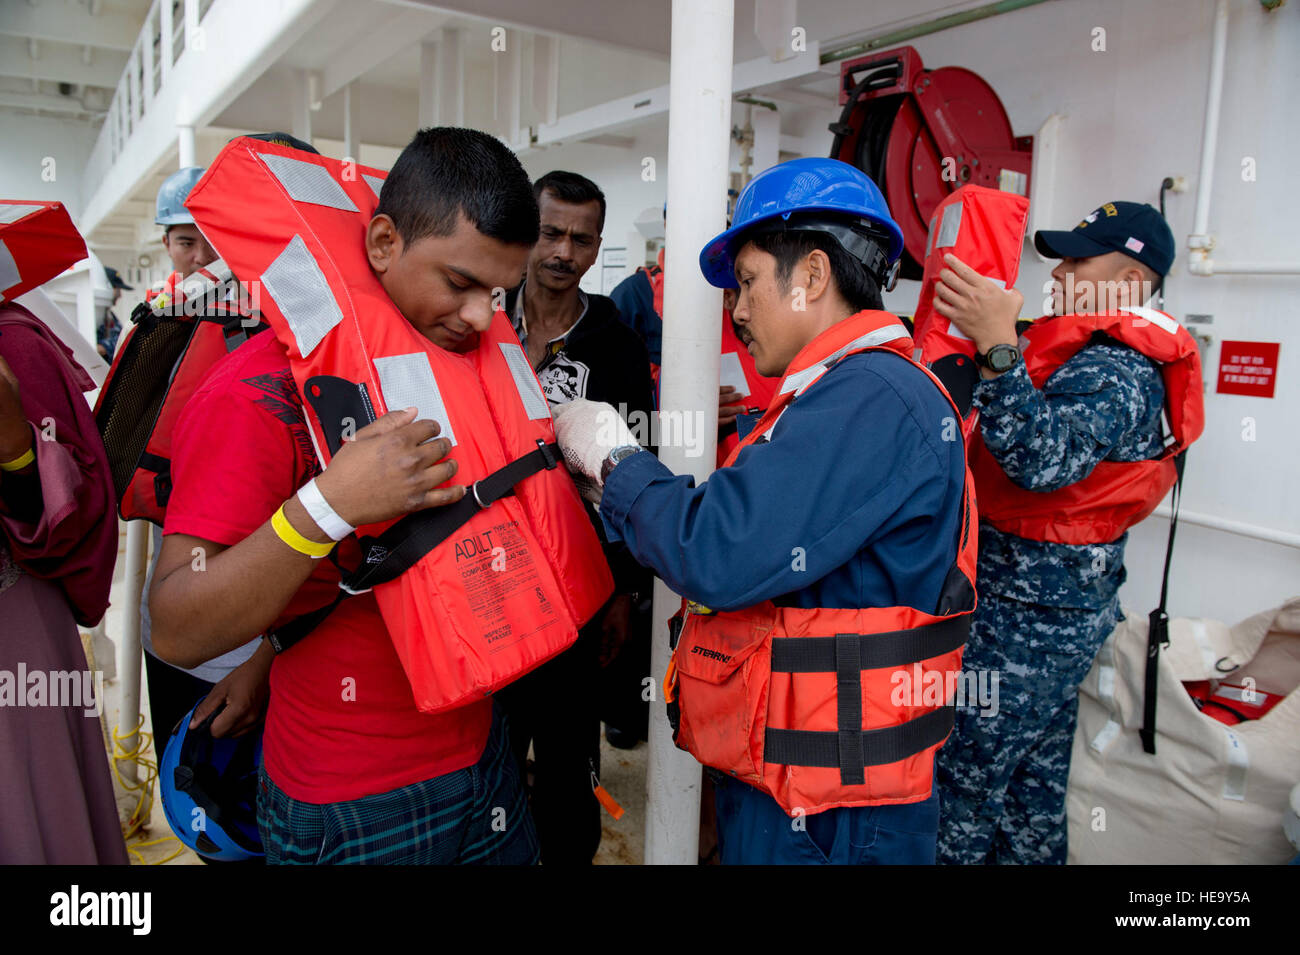 SAVUSAVU, Fiji (June 18, 2015) Winfred Abante, an ordinary seaman with the Military Sealift Command, prepares Fijian patients to depart the hospital ship USNS Mercy (T-AH 19) during Pacific Partnership 2015. Patients returned to shore after receiving medical treatment aboard. Mercy is currently in Savusavu, Fiji, for the first mission port of PP15. Pacific Partnership is in its 10th iteration and is the largest annual multilateral humanitarian assistance and disaster relief preparedness mission conducted in the Indo-Asia-Pacific region. While training for crisis conditions, Pacific Partnership Stock Photo